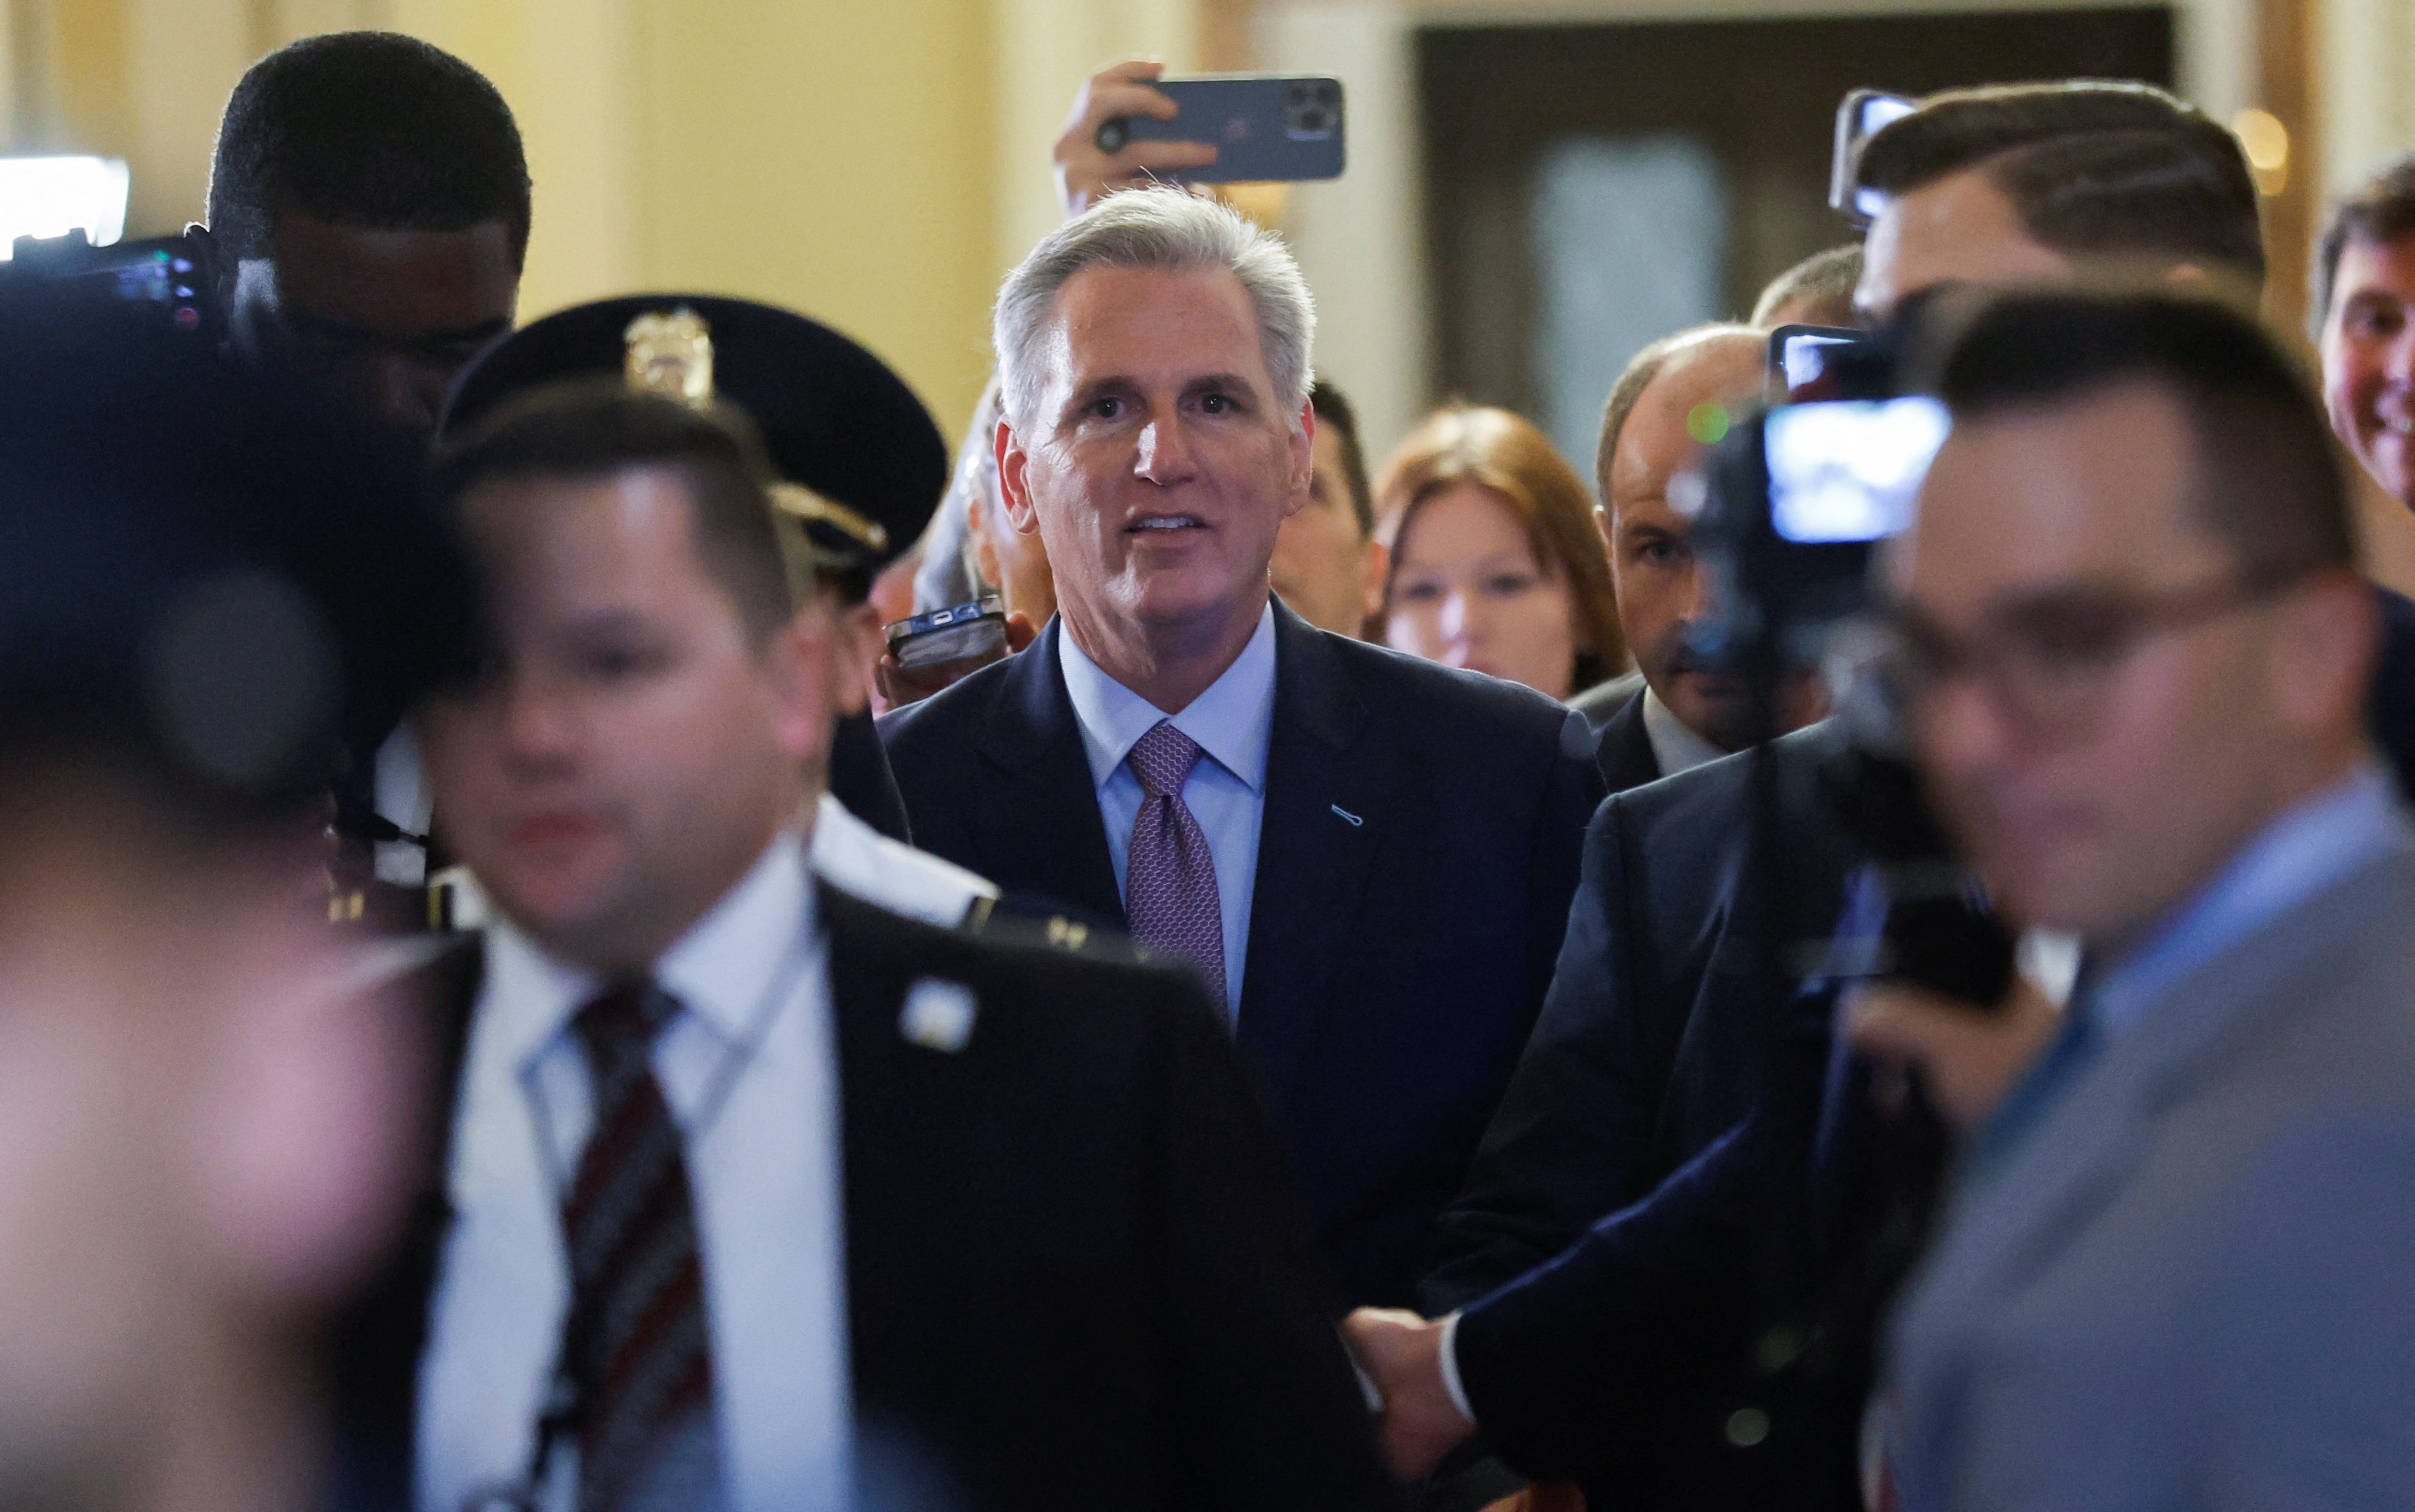 U.S. House Speaker Kevin McCarthy walks through crowd of reporters at Capitol in Washington